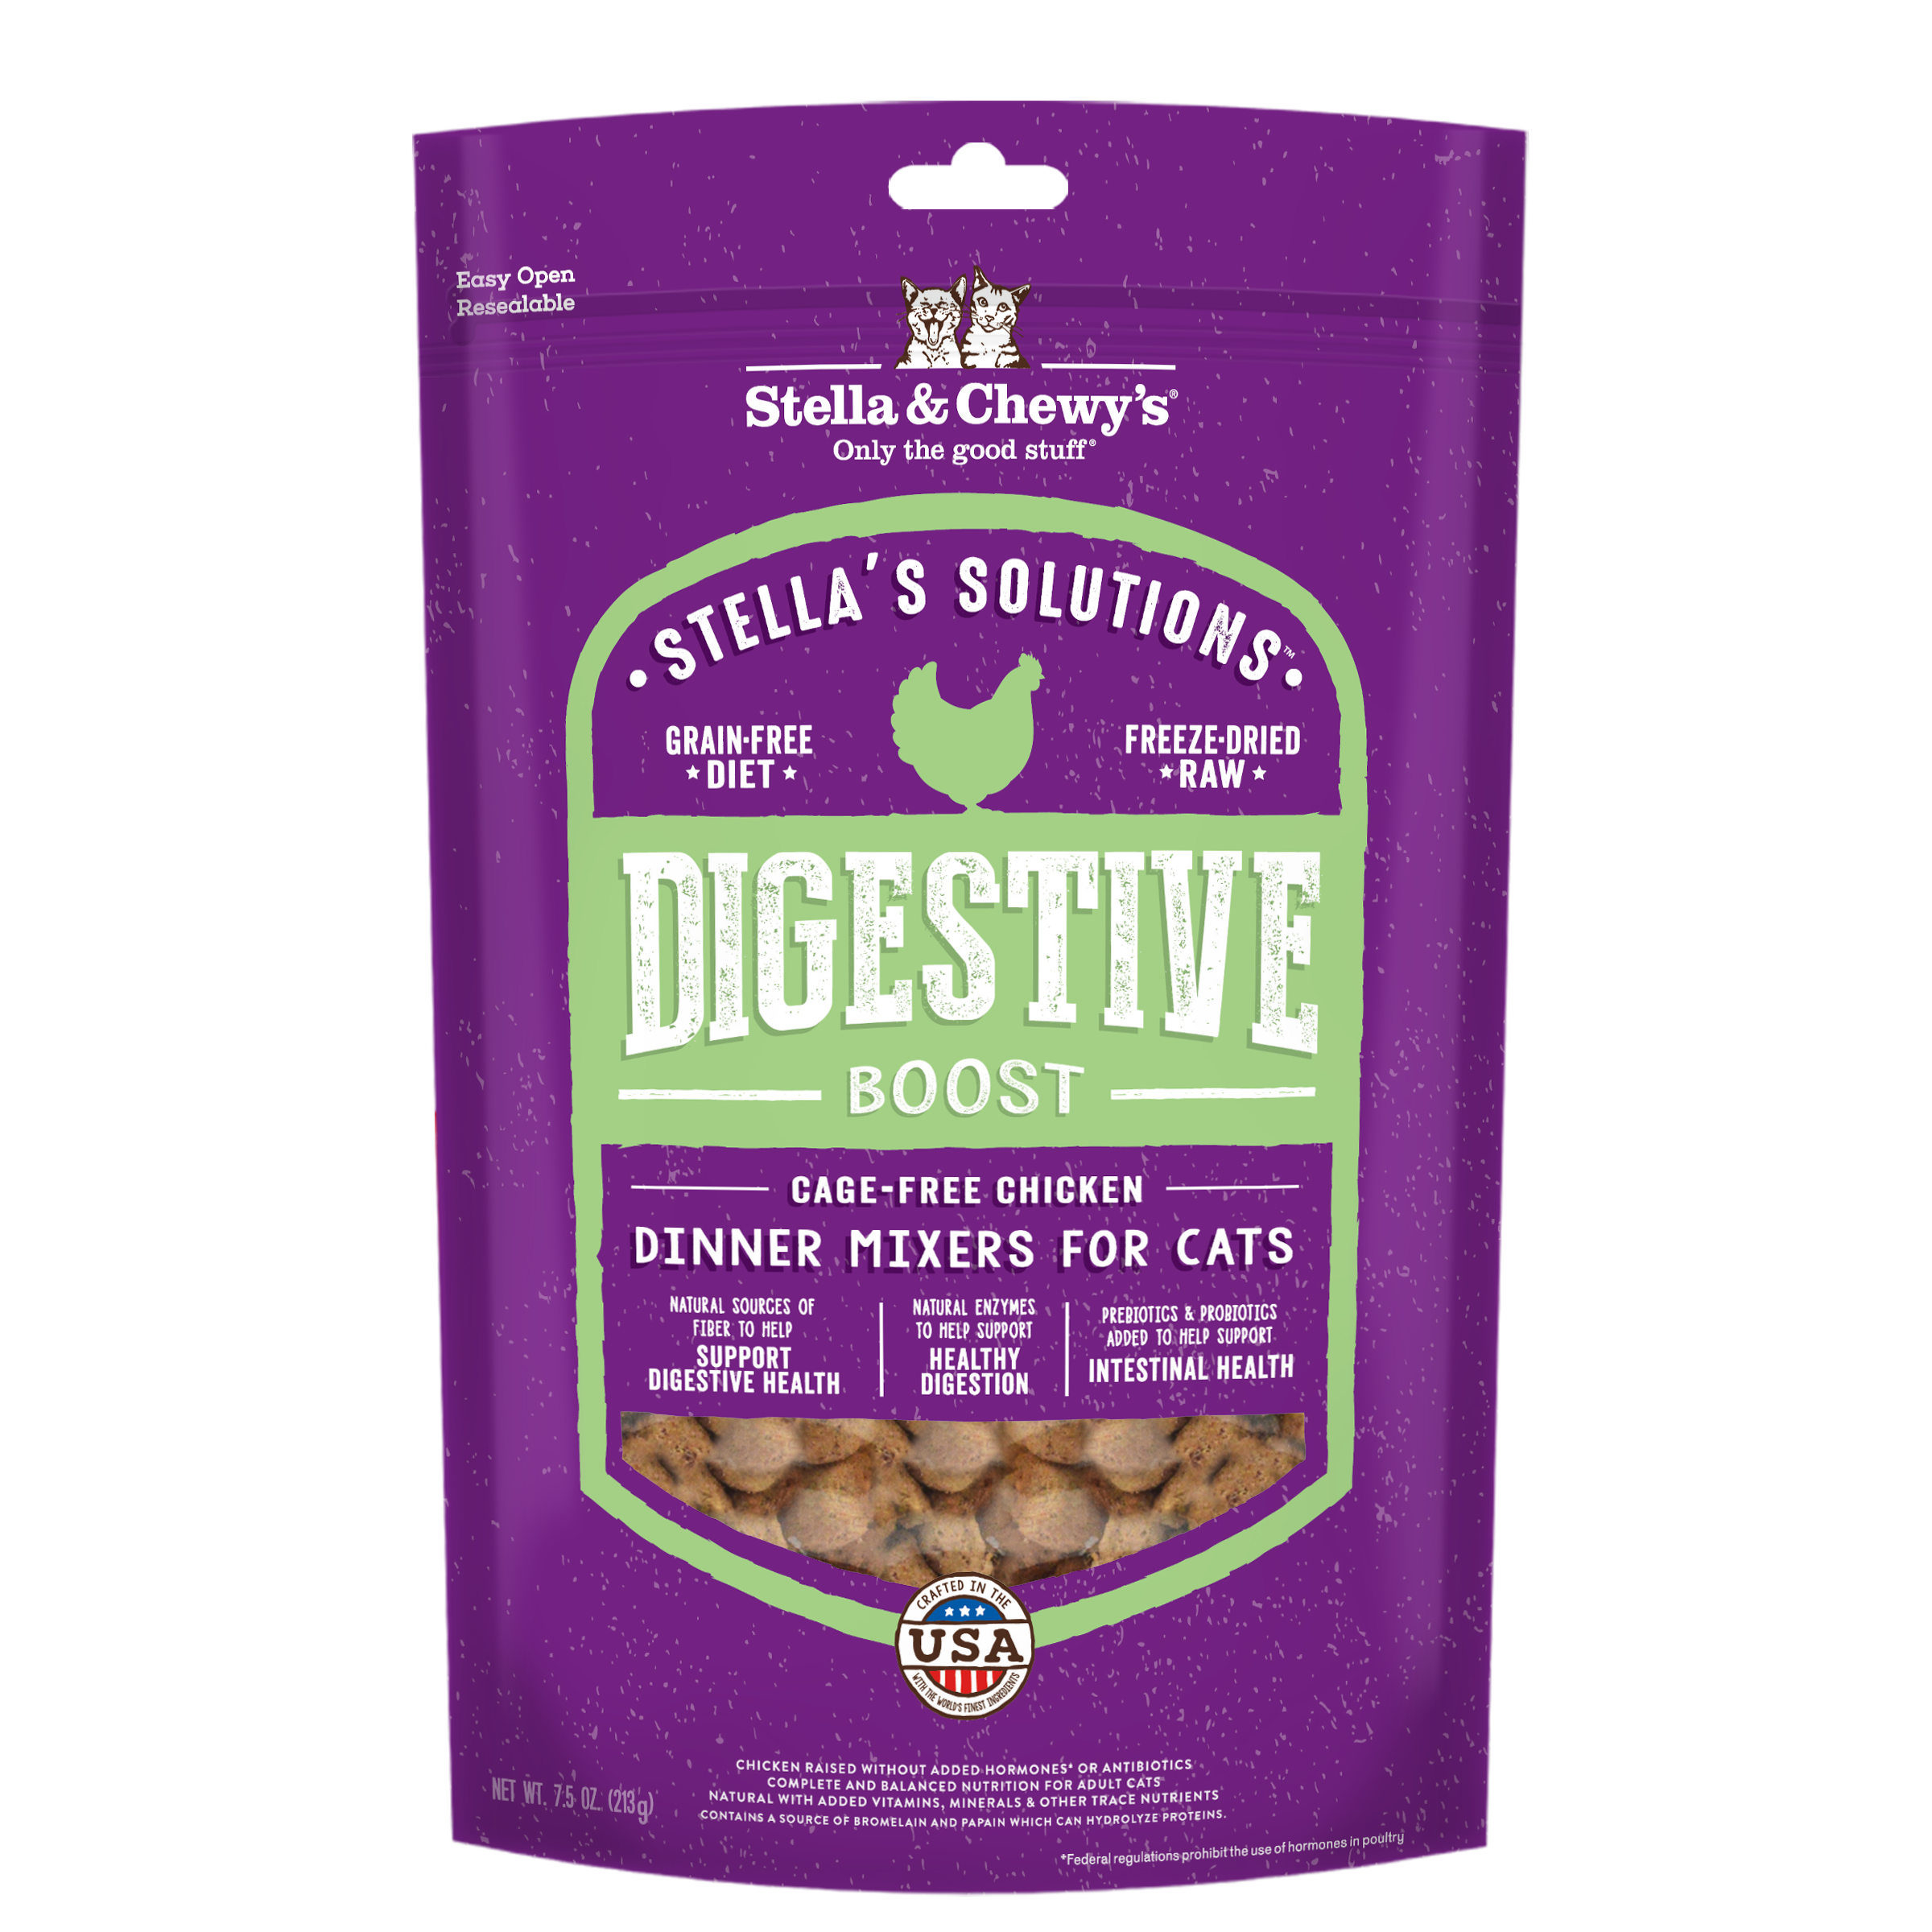 Stella & Chewy's Stella's Solutions Freeze-Dried Dinner Mixers For Cats